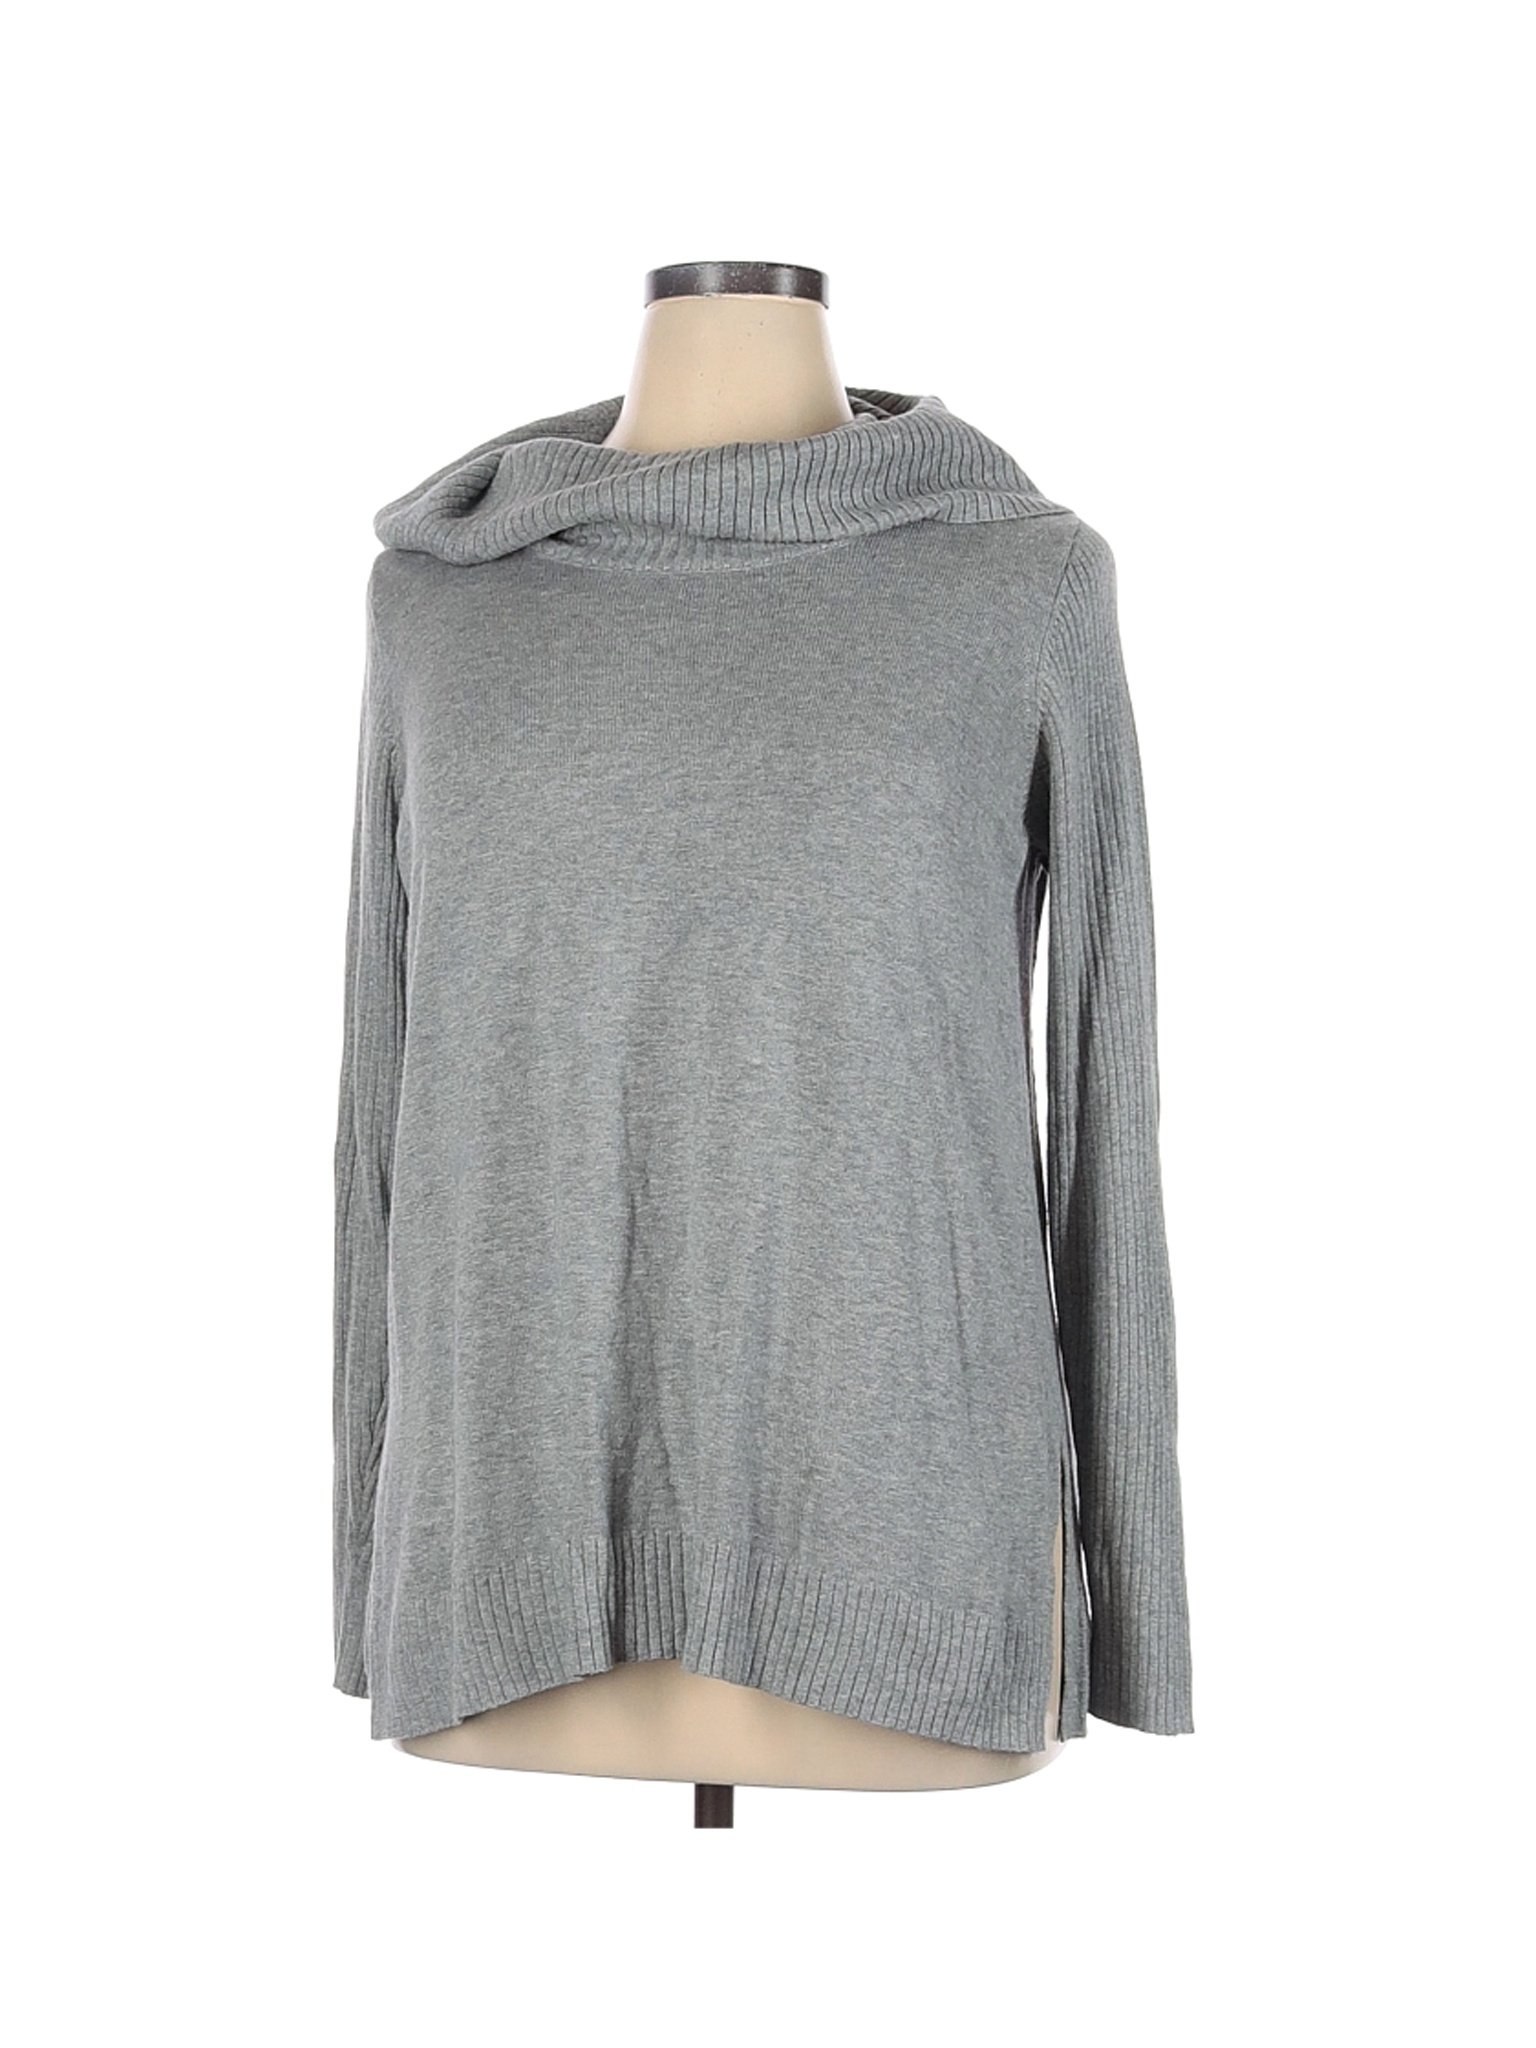 Crown & Ivy Solid Gray Pullover Sweater Size XL - 70% off | thredUP